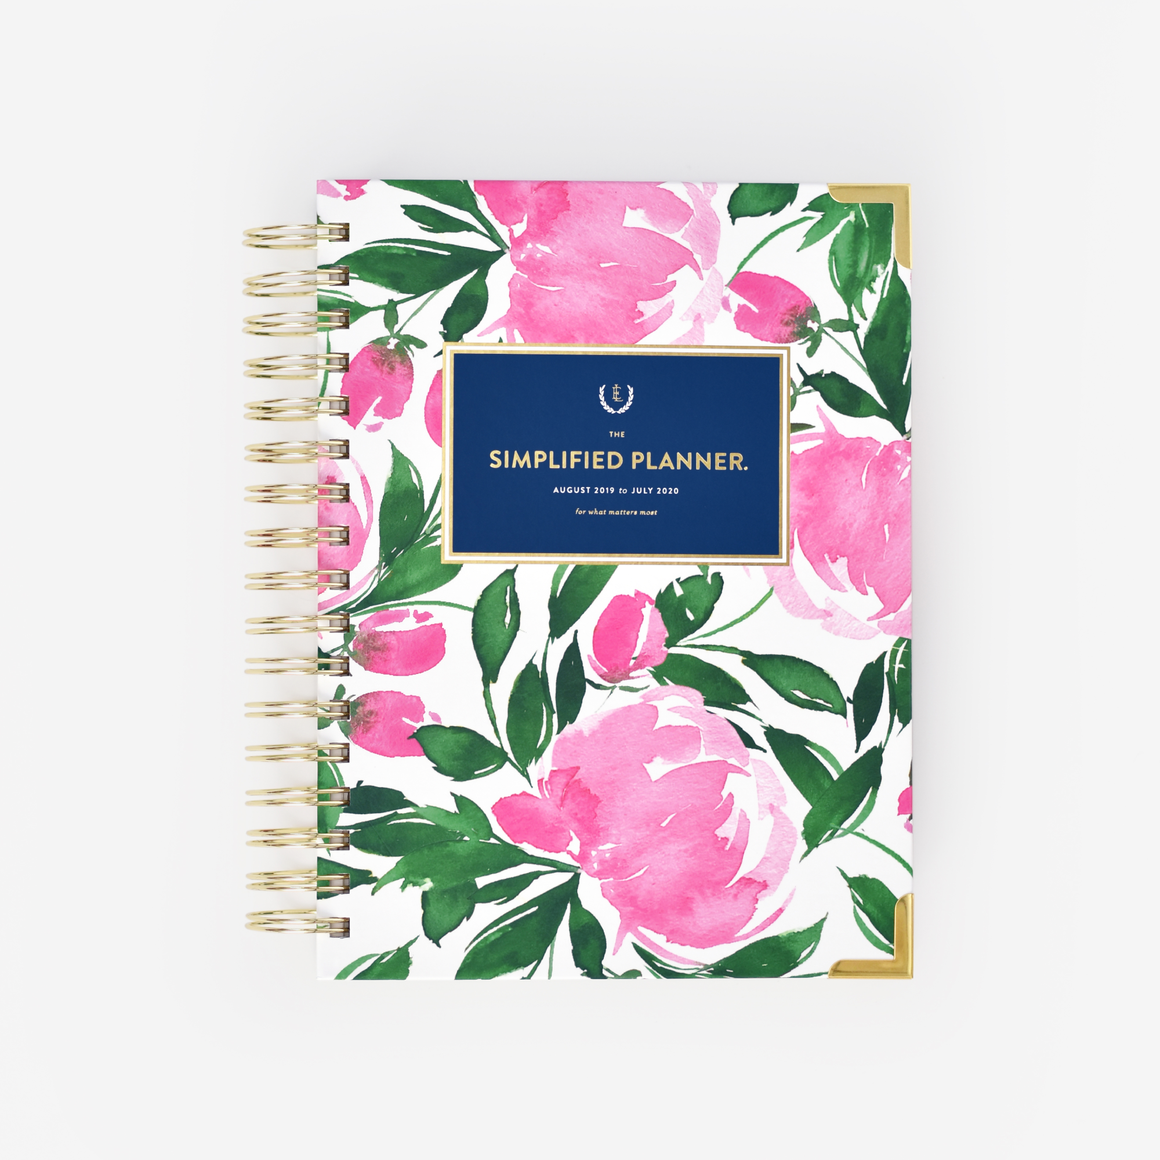 Simplified Planners in Greensboro, NC